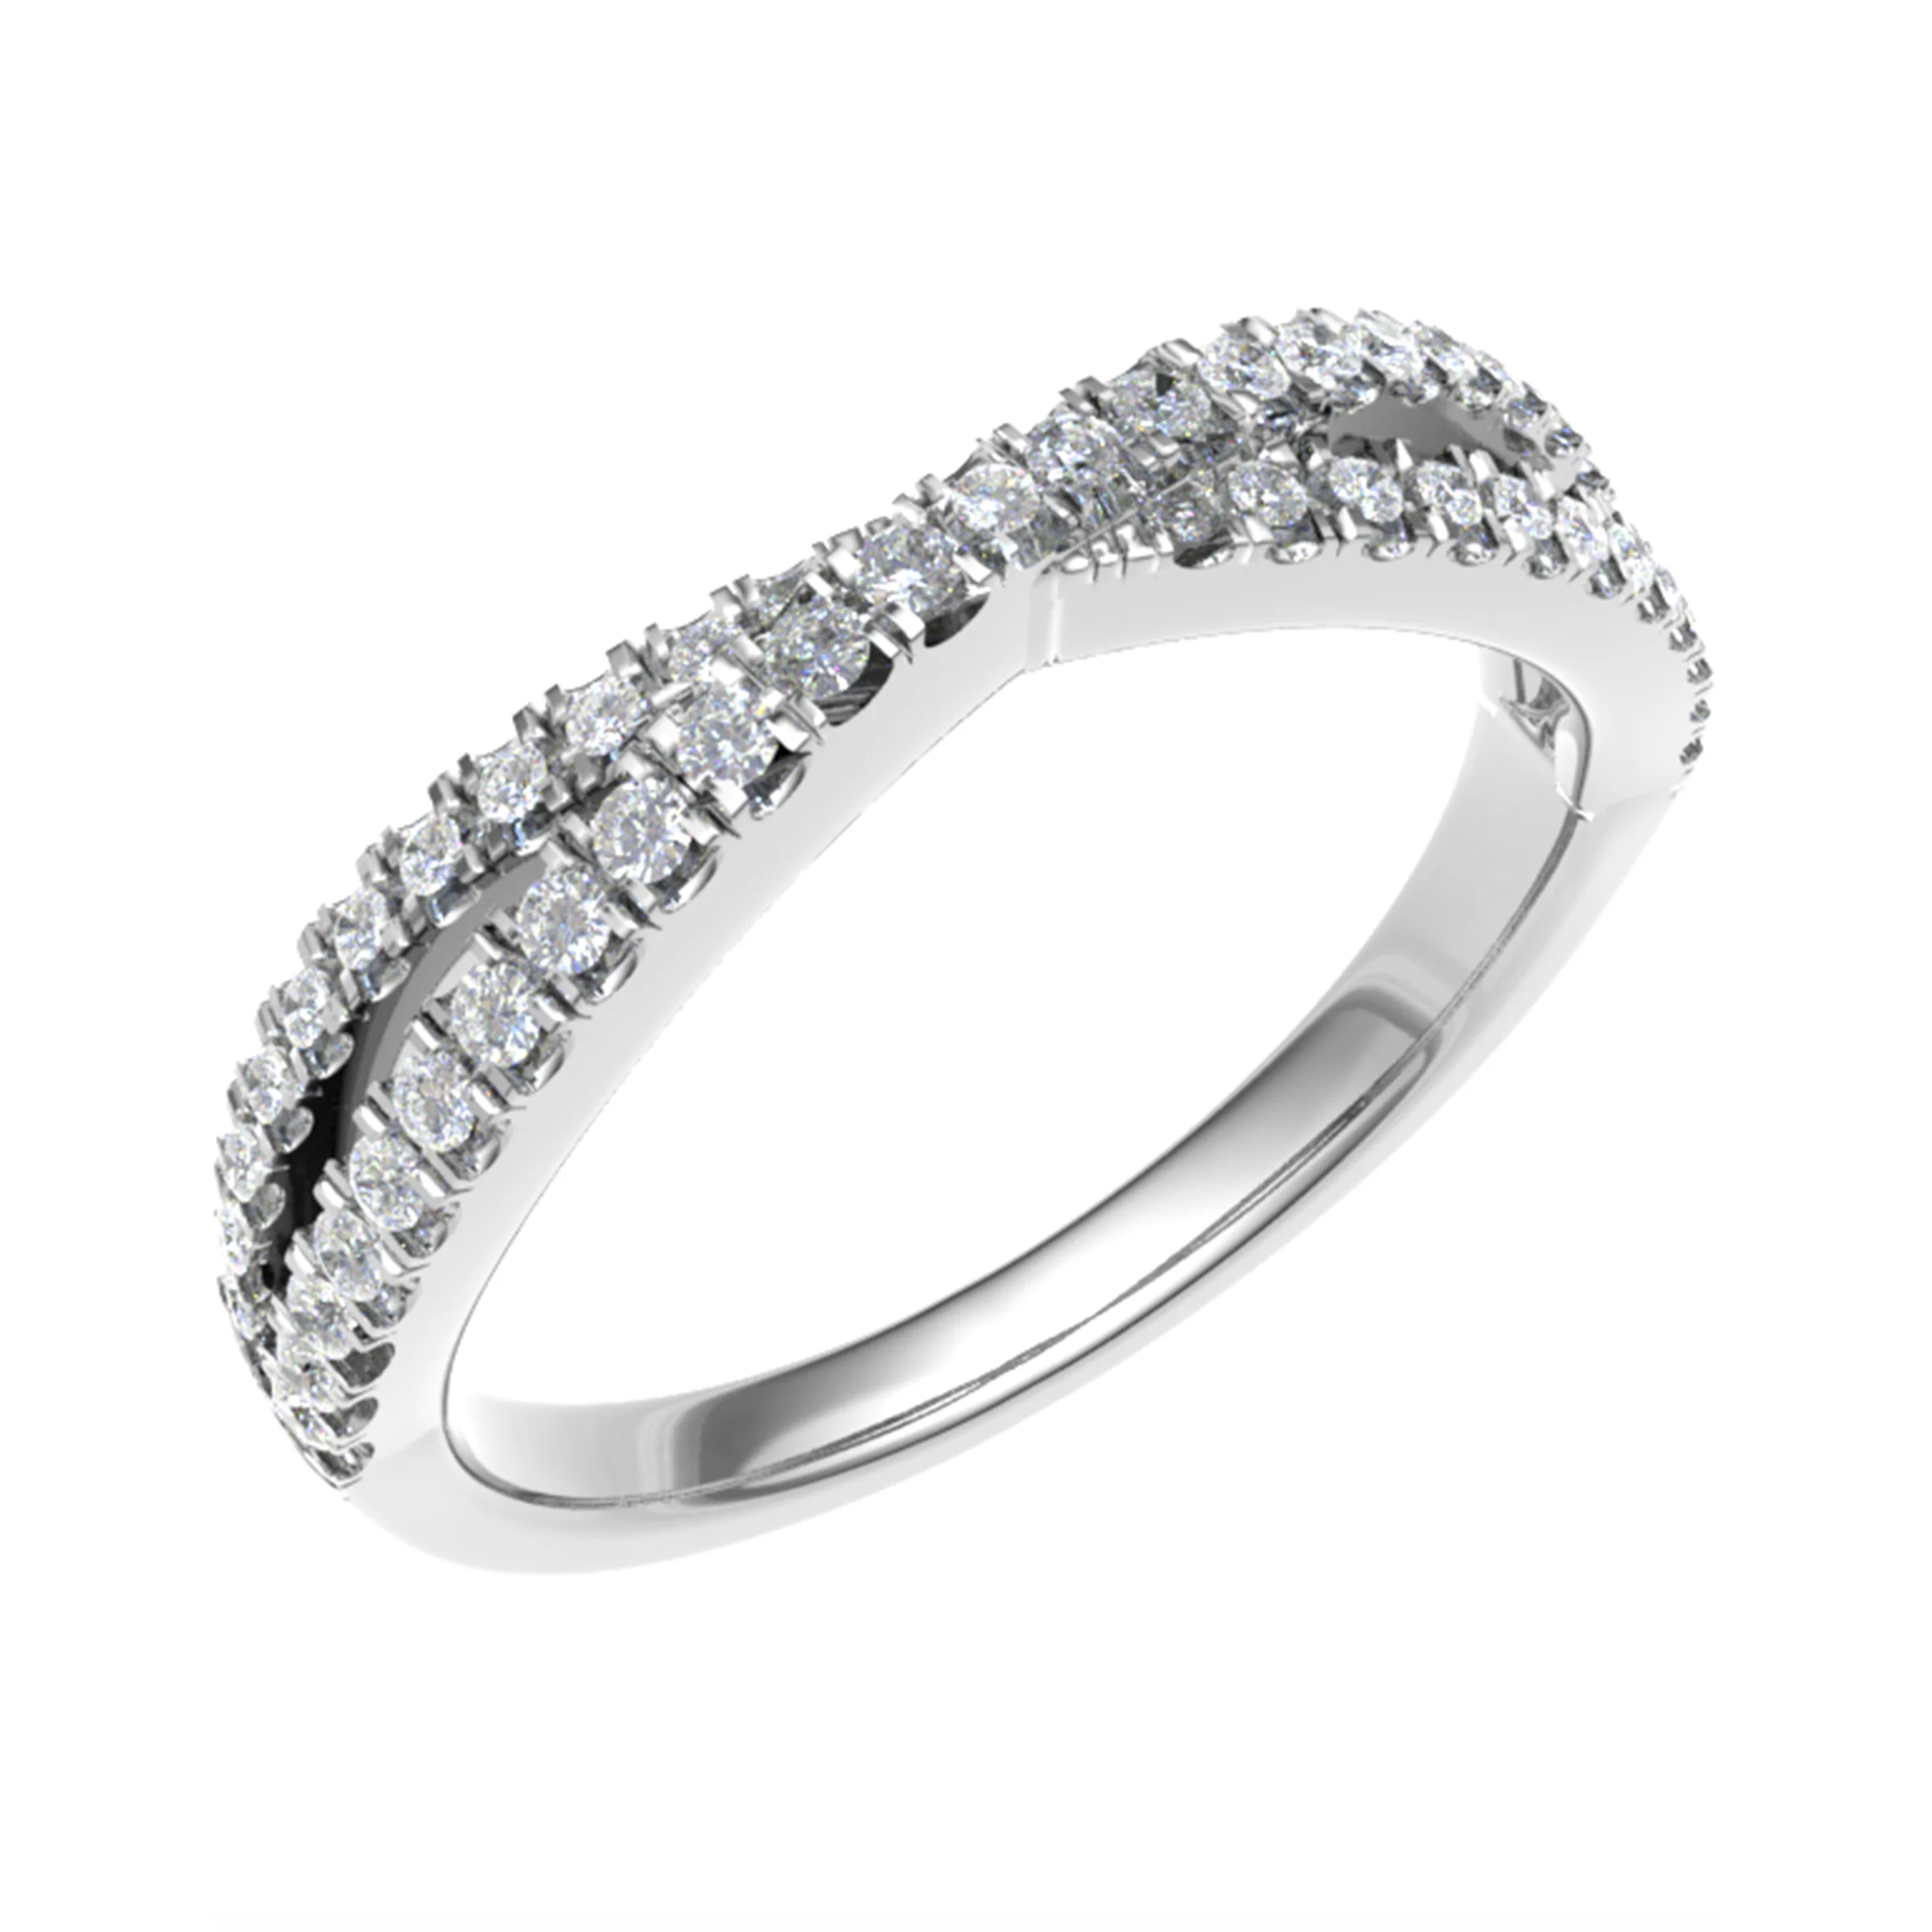 0.40 Carat Round Diamonds Twisted Half Eternity Ring with Micro Claw Set